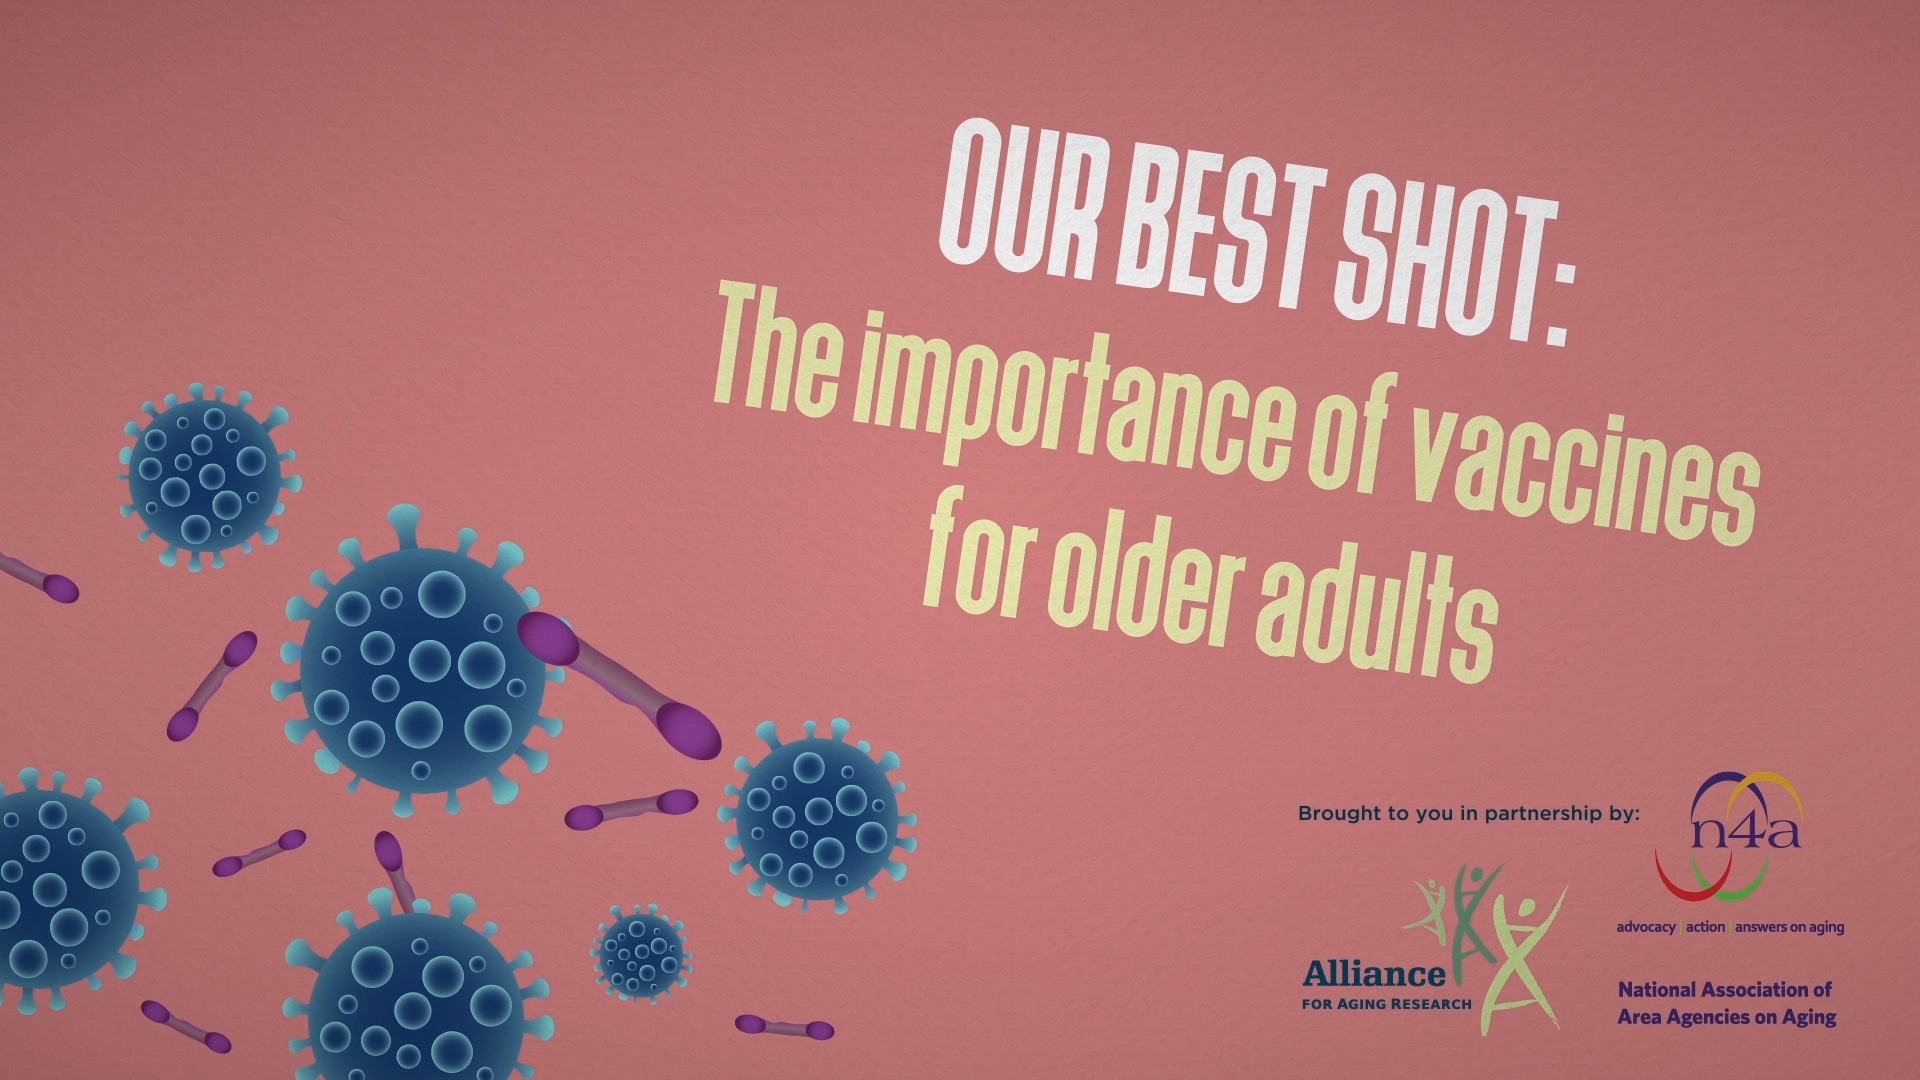 "Our Best Shot: The Importance of Vaccines for Older Adults" cover.